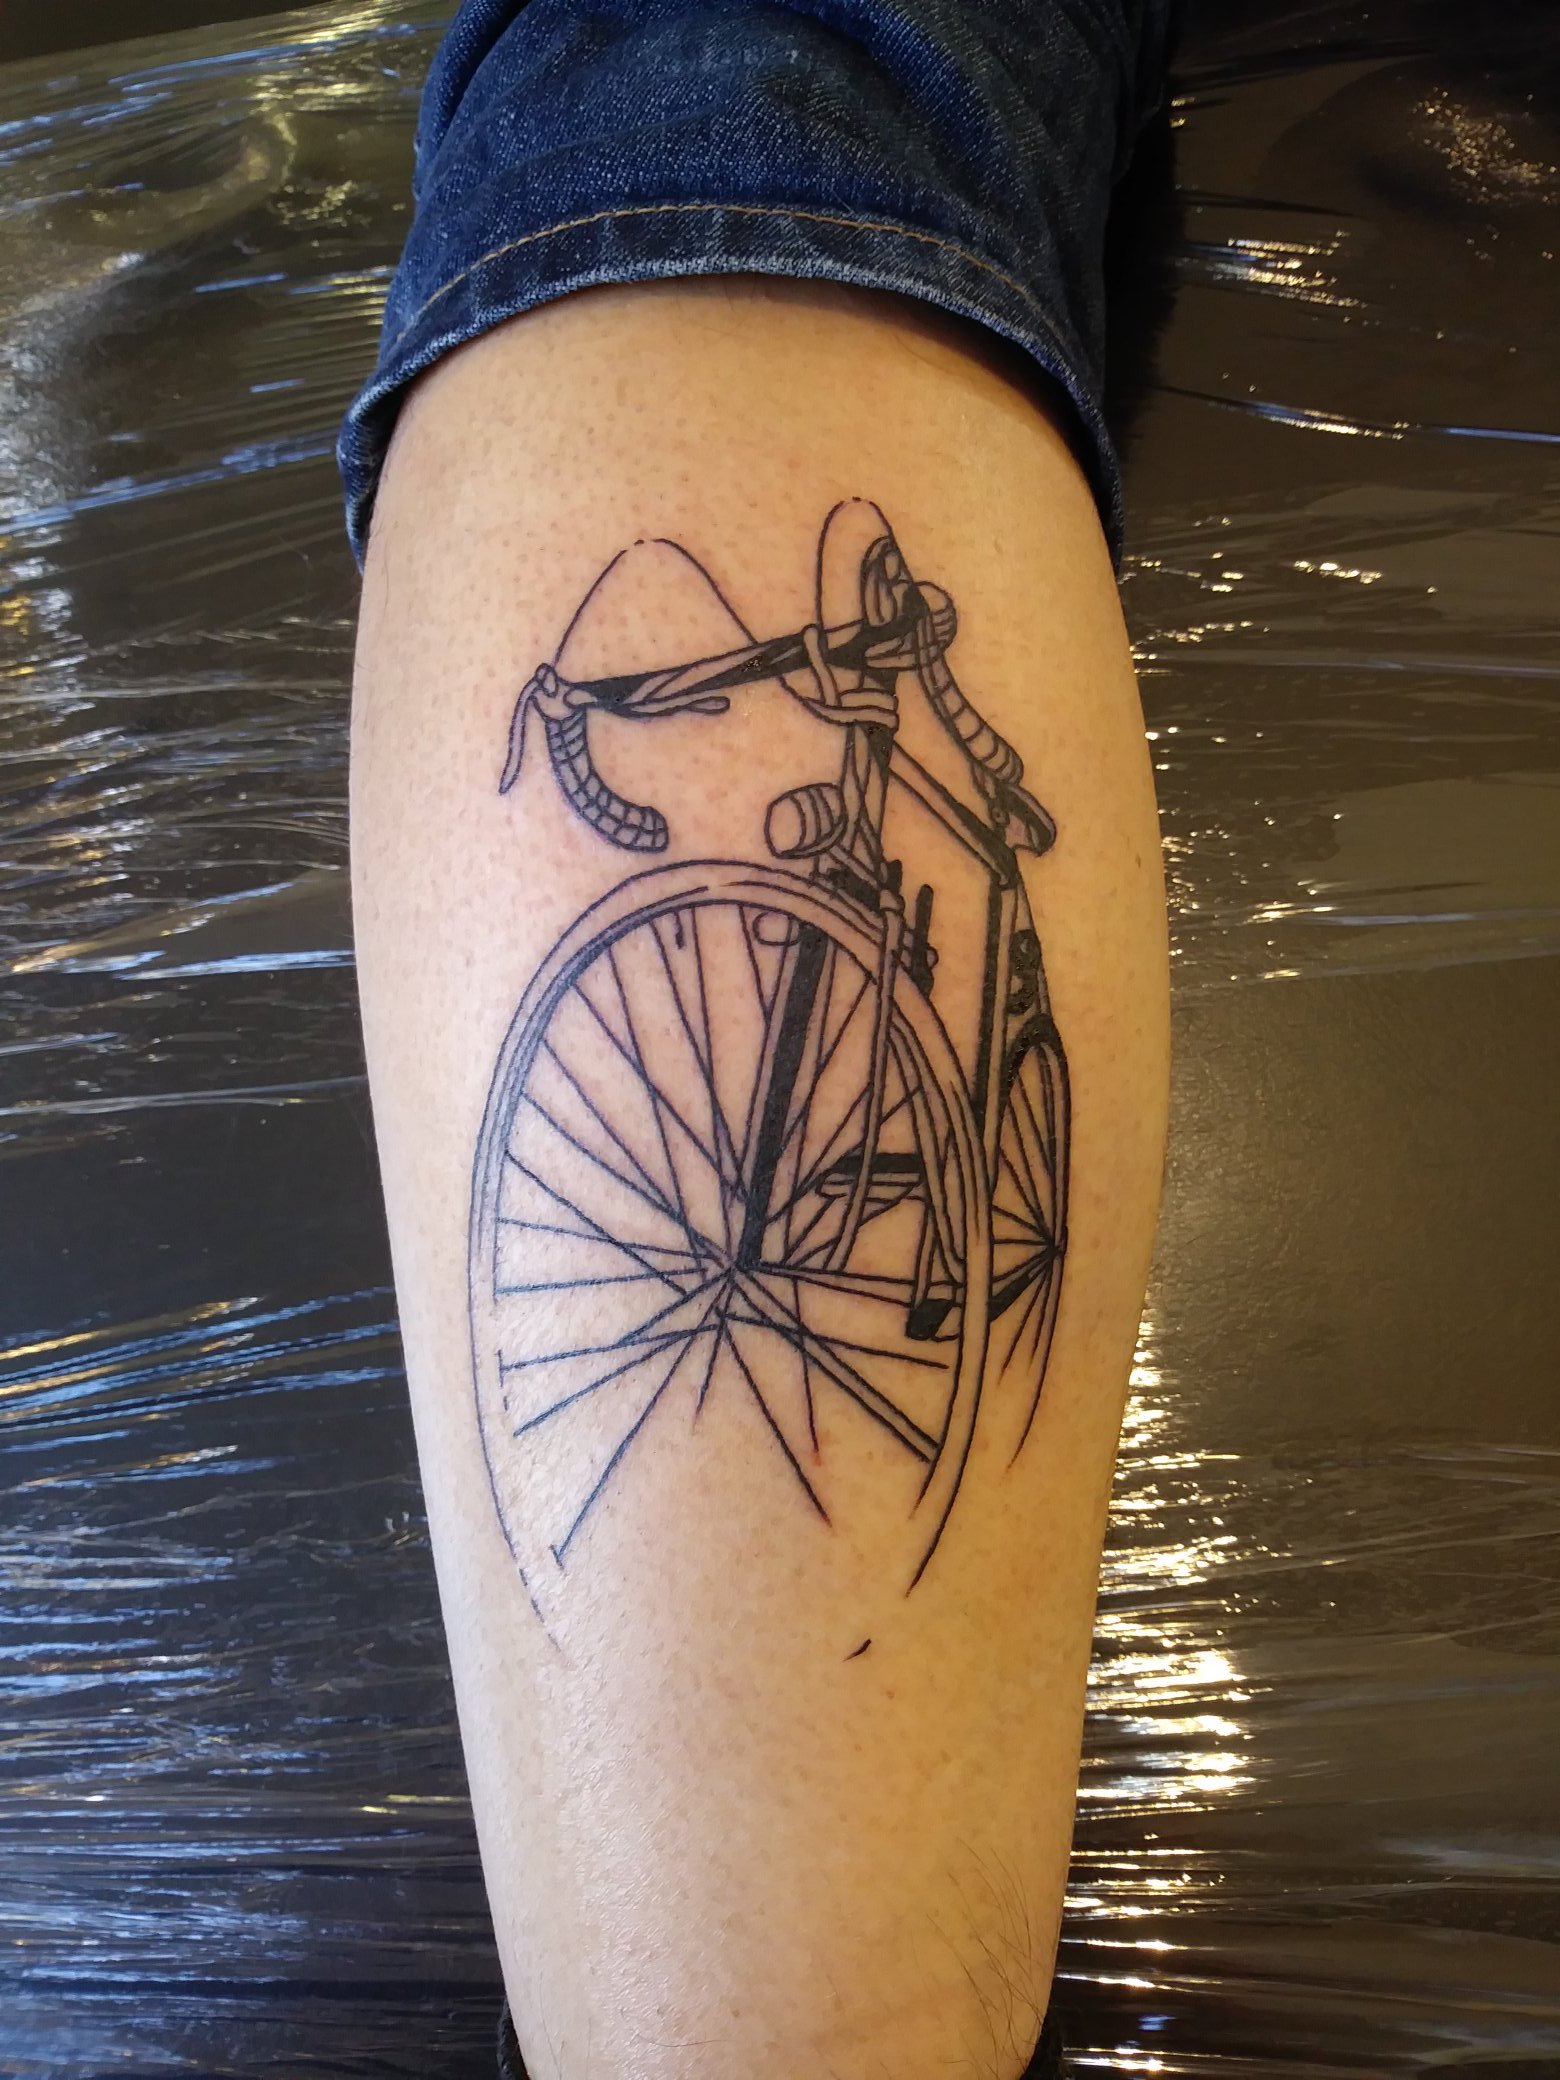 My bicycle tattoo, immediately after it was done